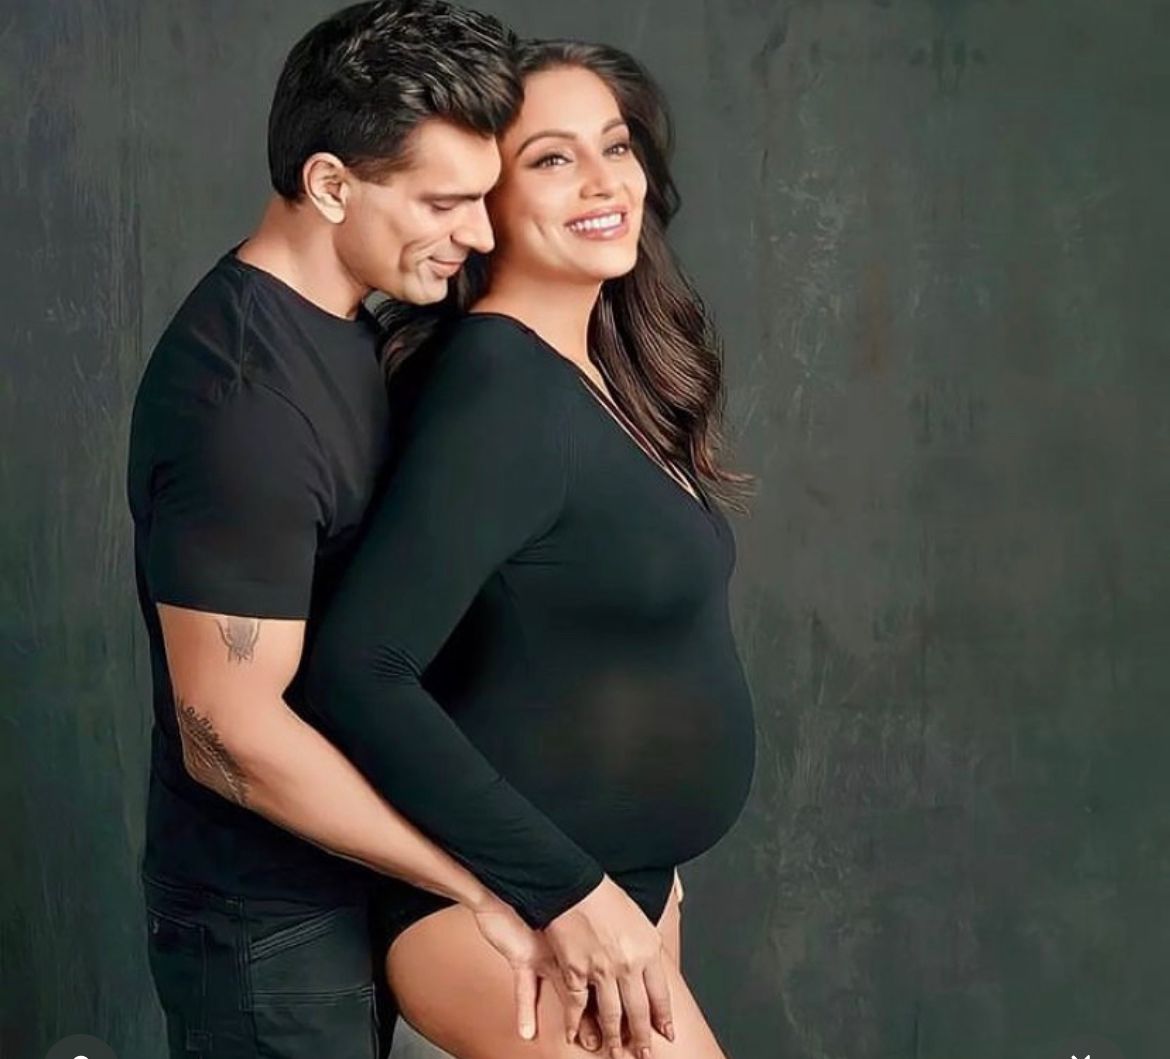 Dad-To-Be, Karan Singh Grover Expresses His Joy On Soon Welcoming A 'Little Monkey Baby' In His Life